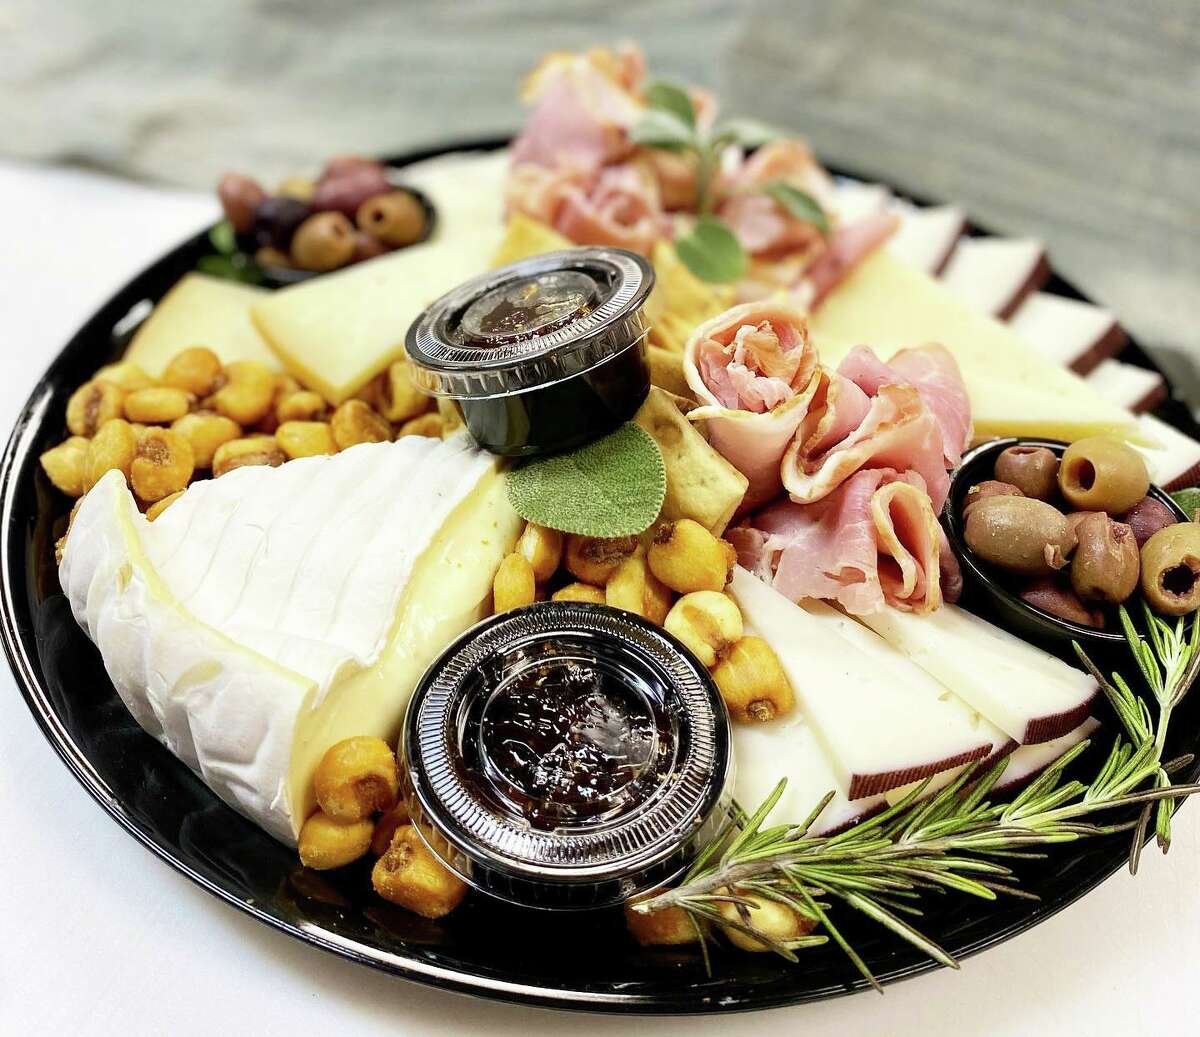 Spread Cheese Co., in Main Street Market at 386 Main St., Middletown, is offering cheese and wine platters and baskets for holiday gift-giving.